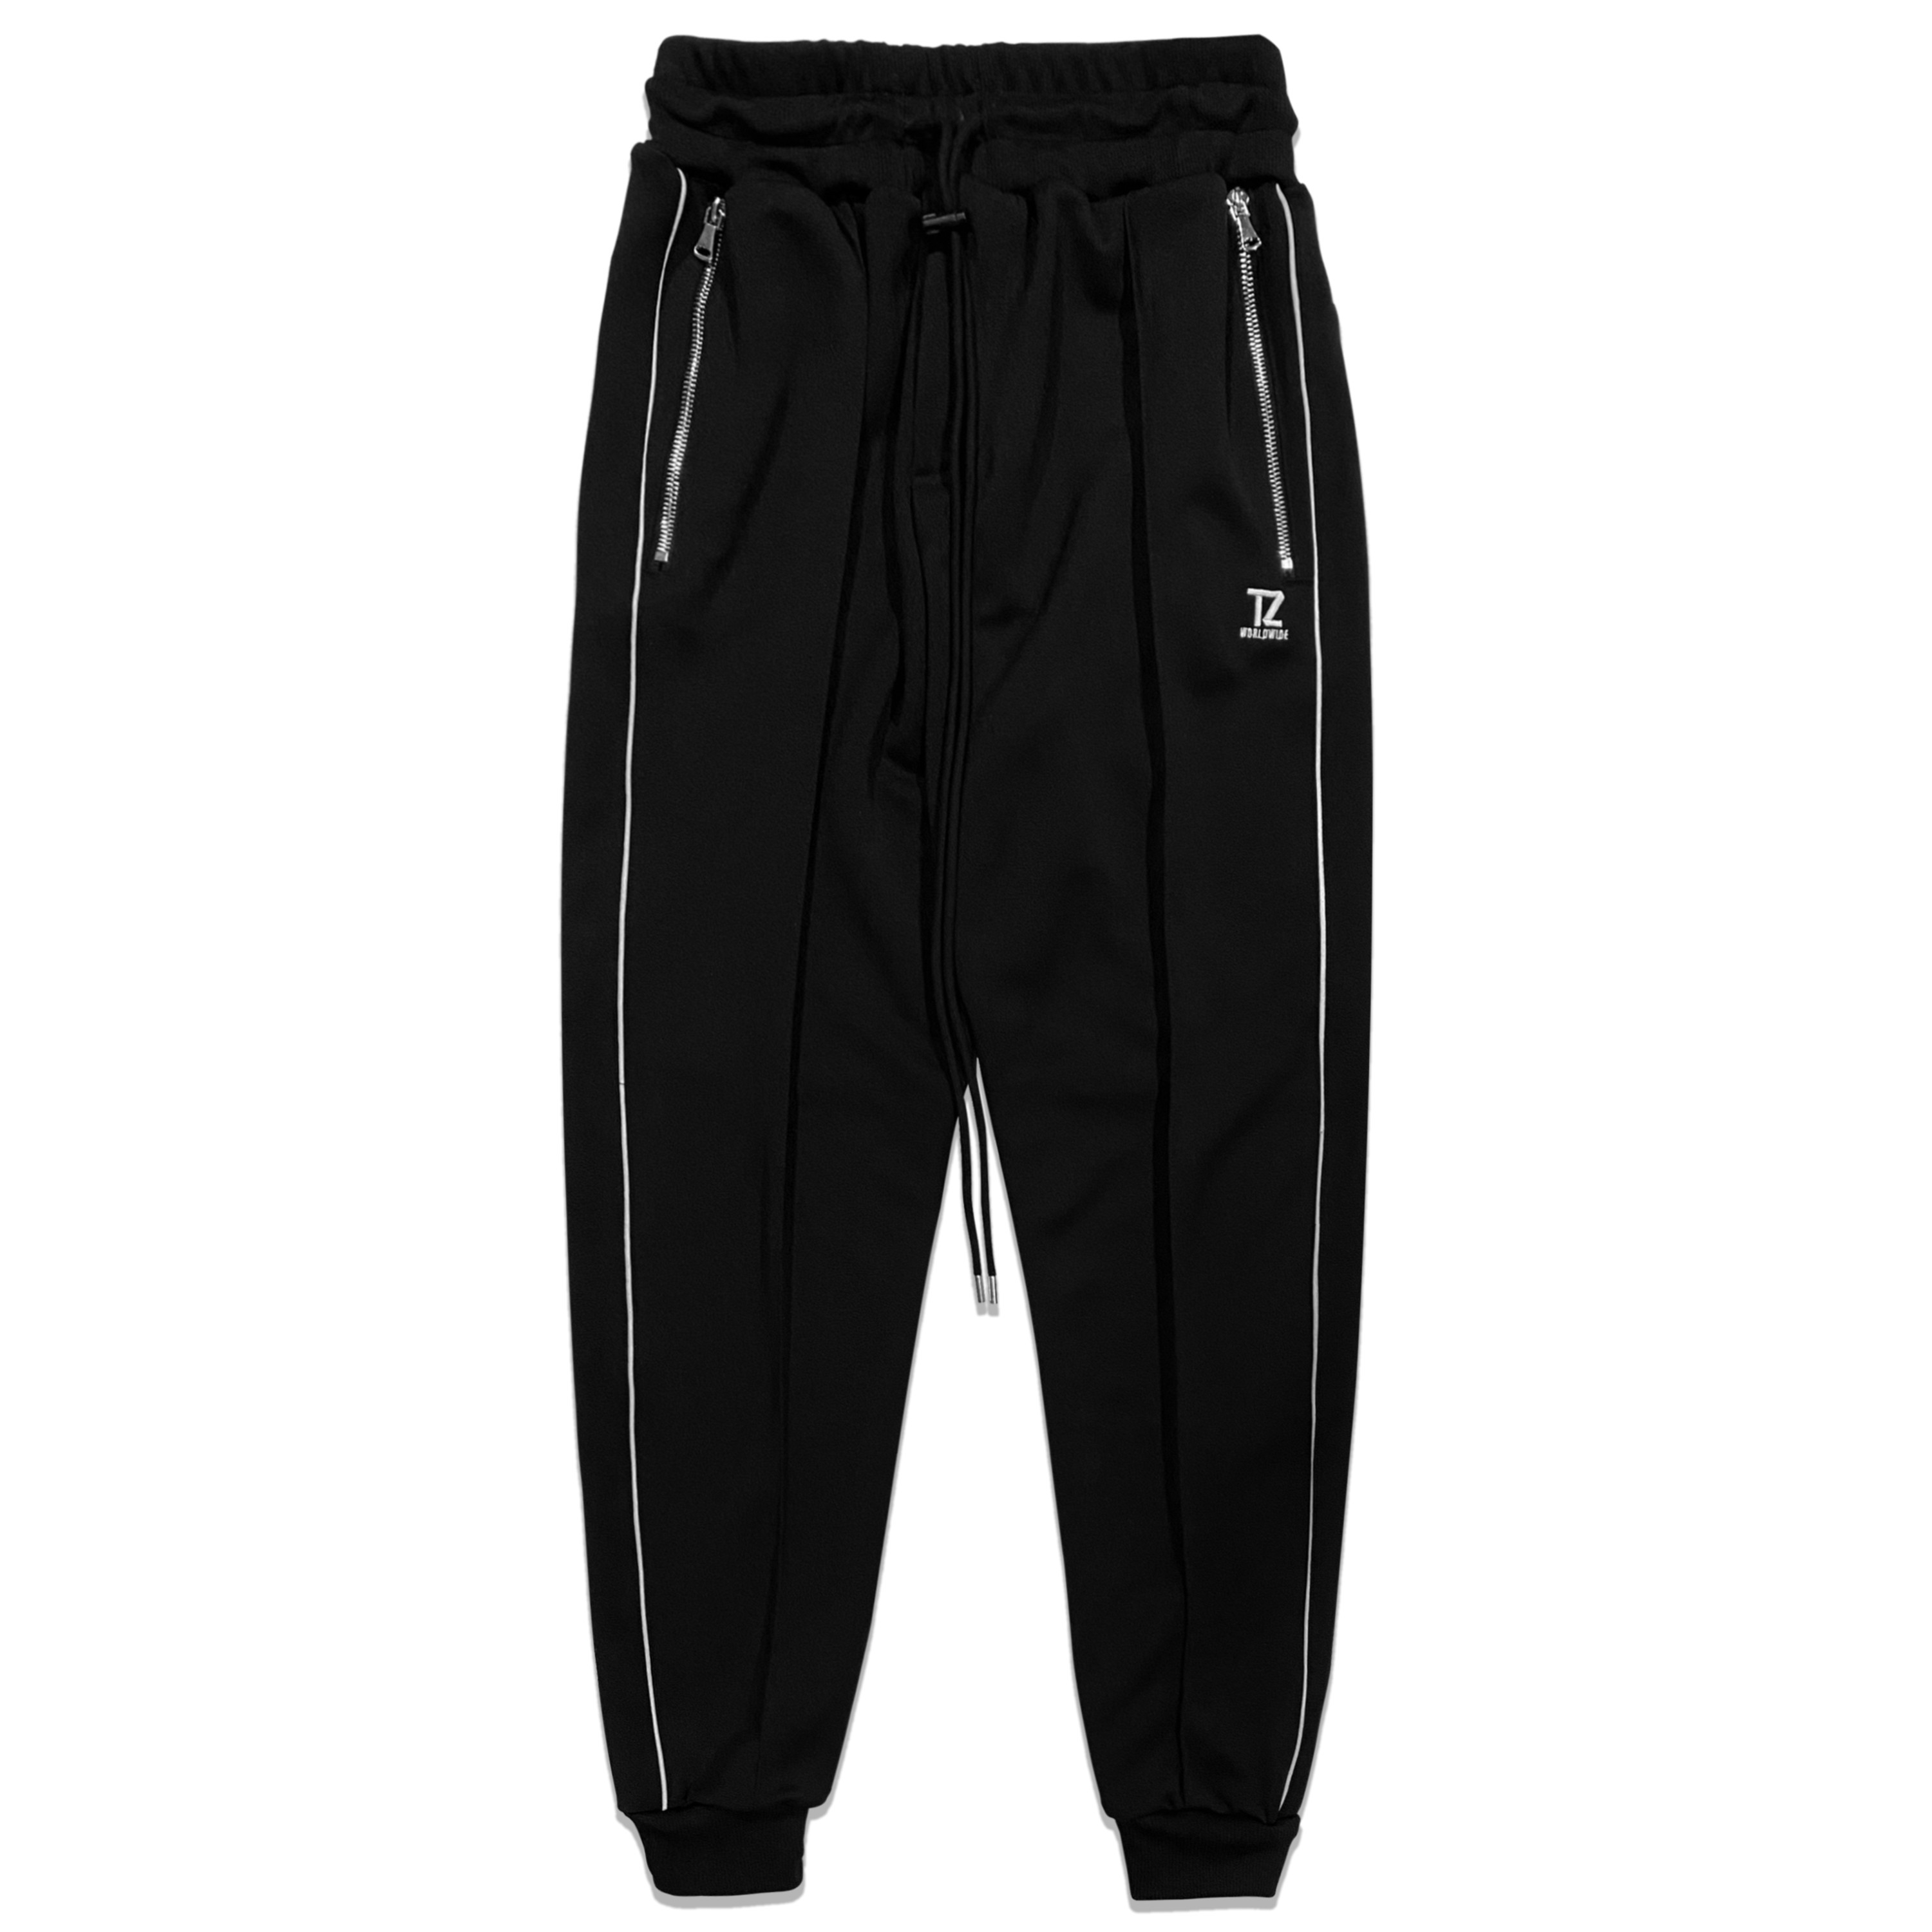 TZ Track Pants - Reflective Piping (Black) Size S